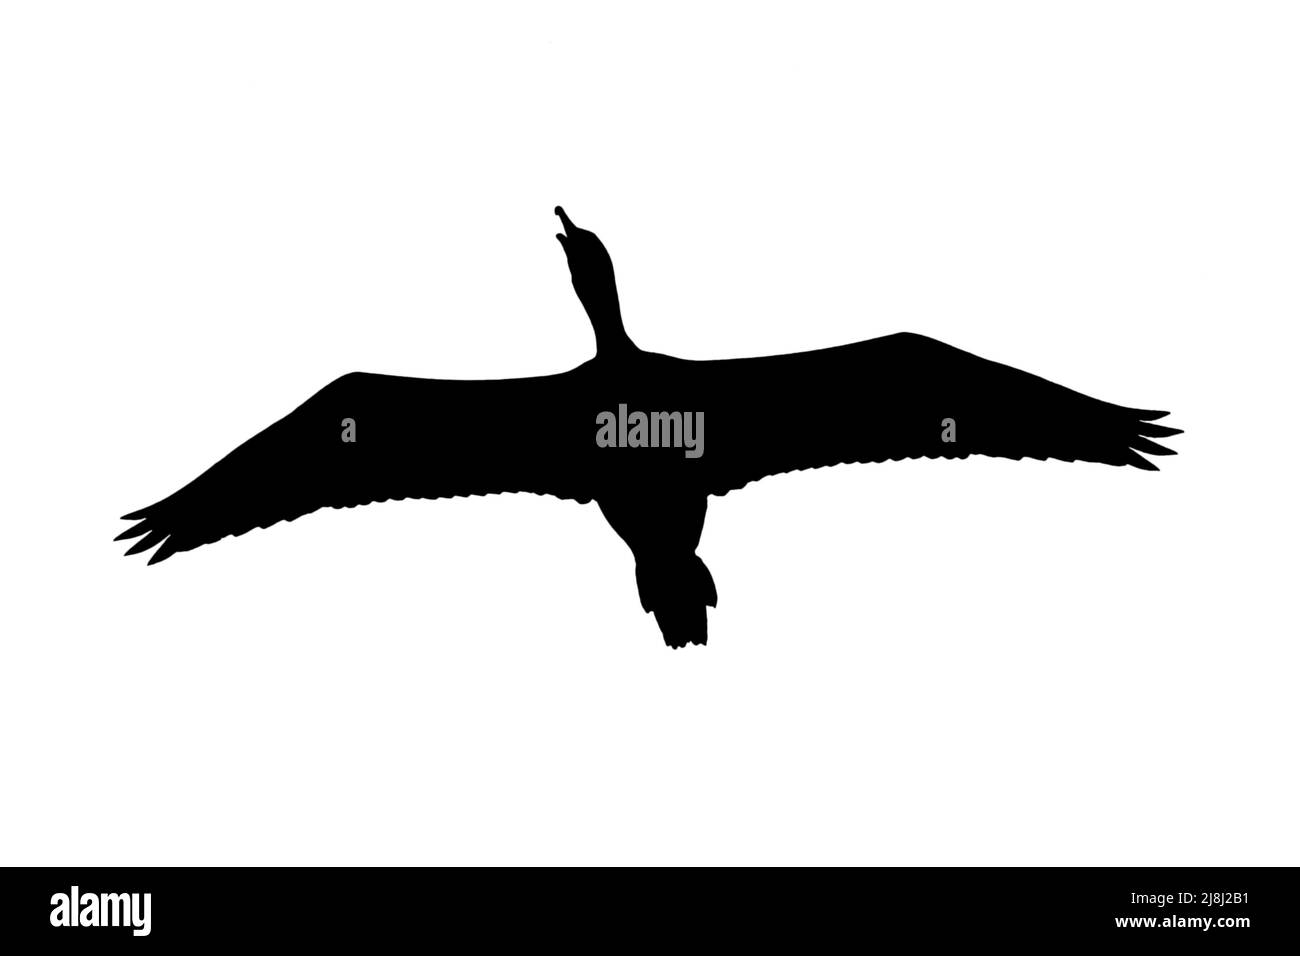 Silhouette of great cormorant (Phalacrocorax carbo) in flight outlined against white background to show wings, head and tail shapes Stock Photo